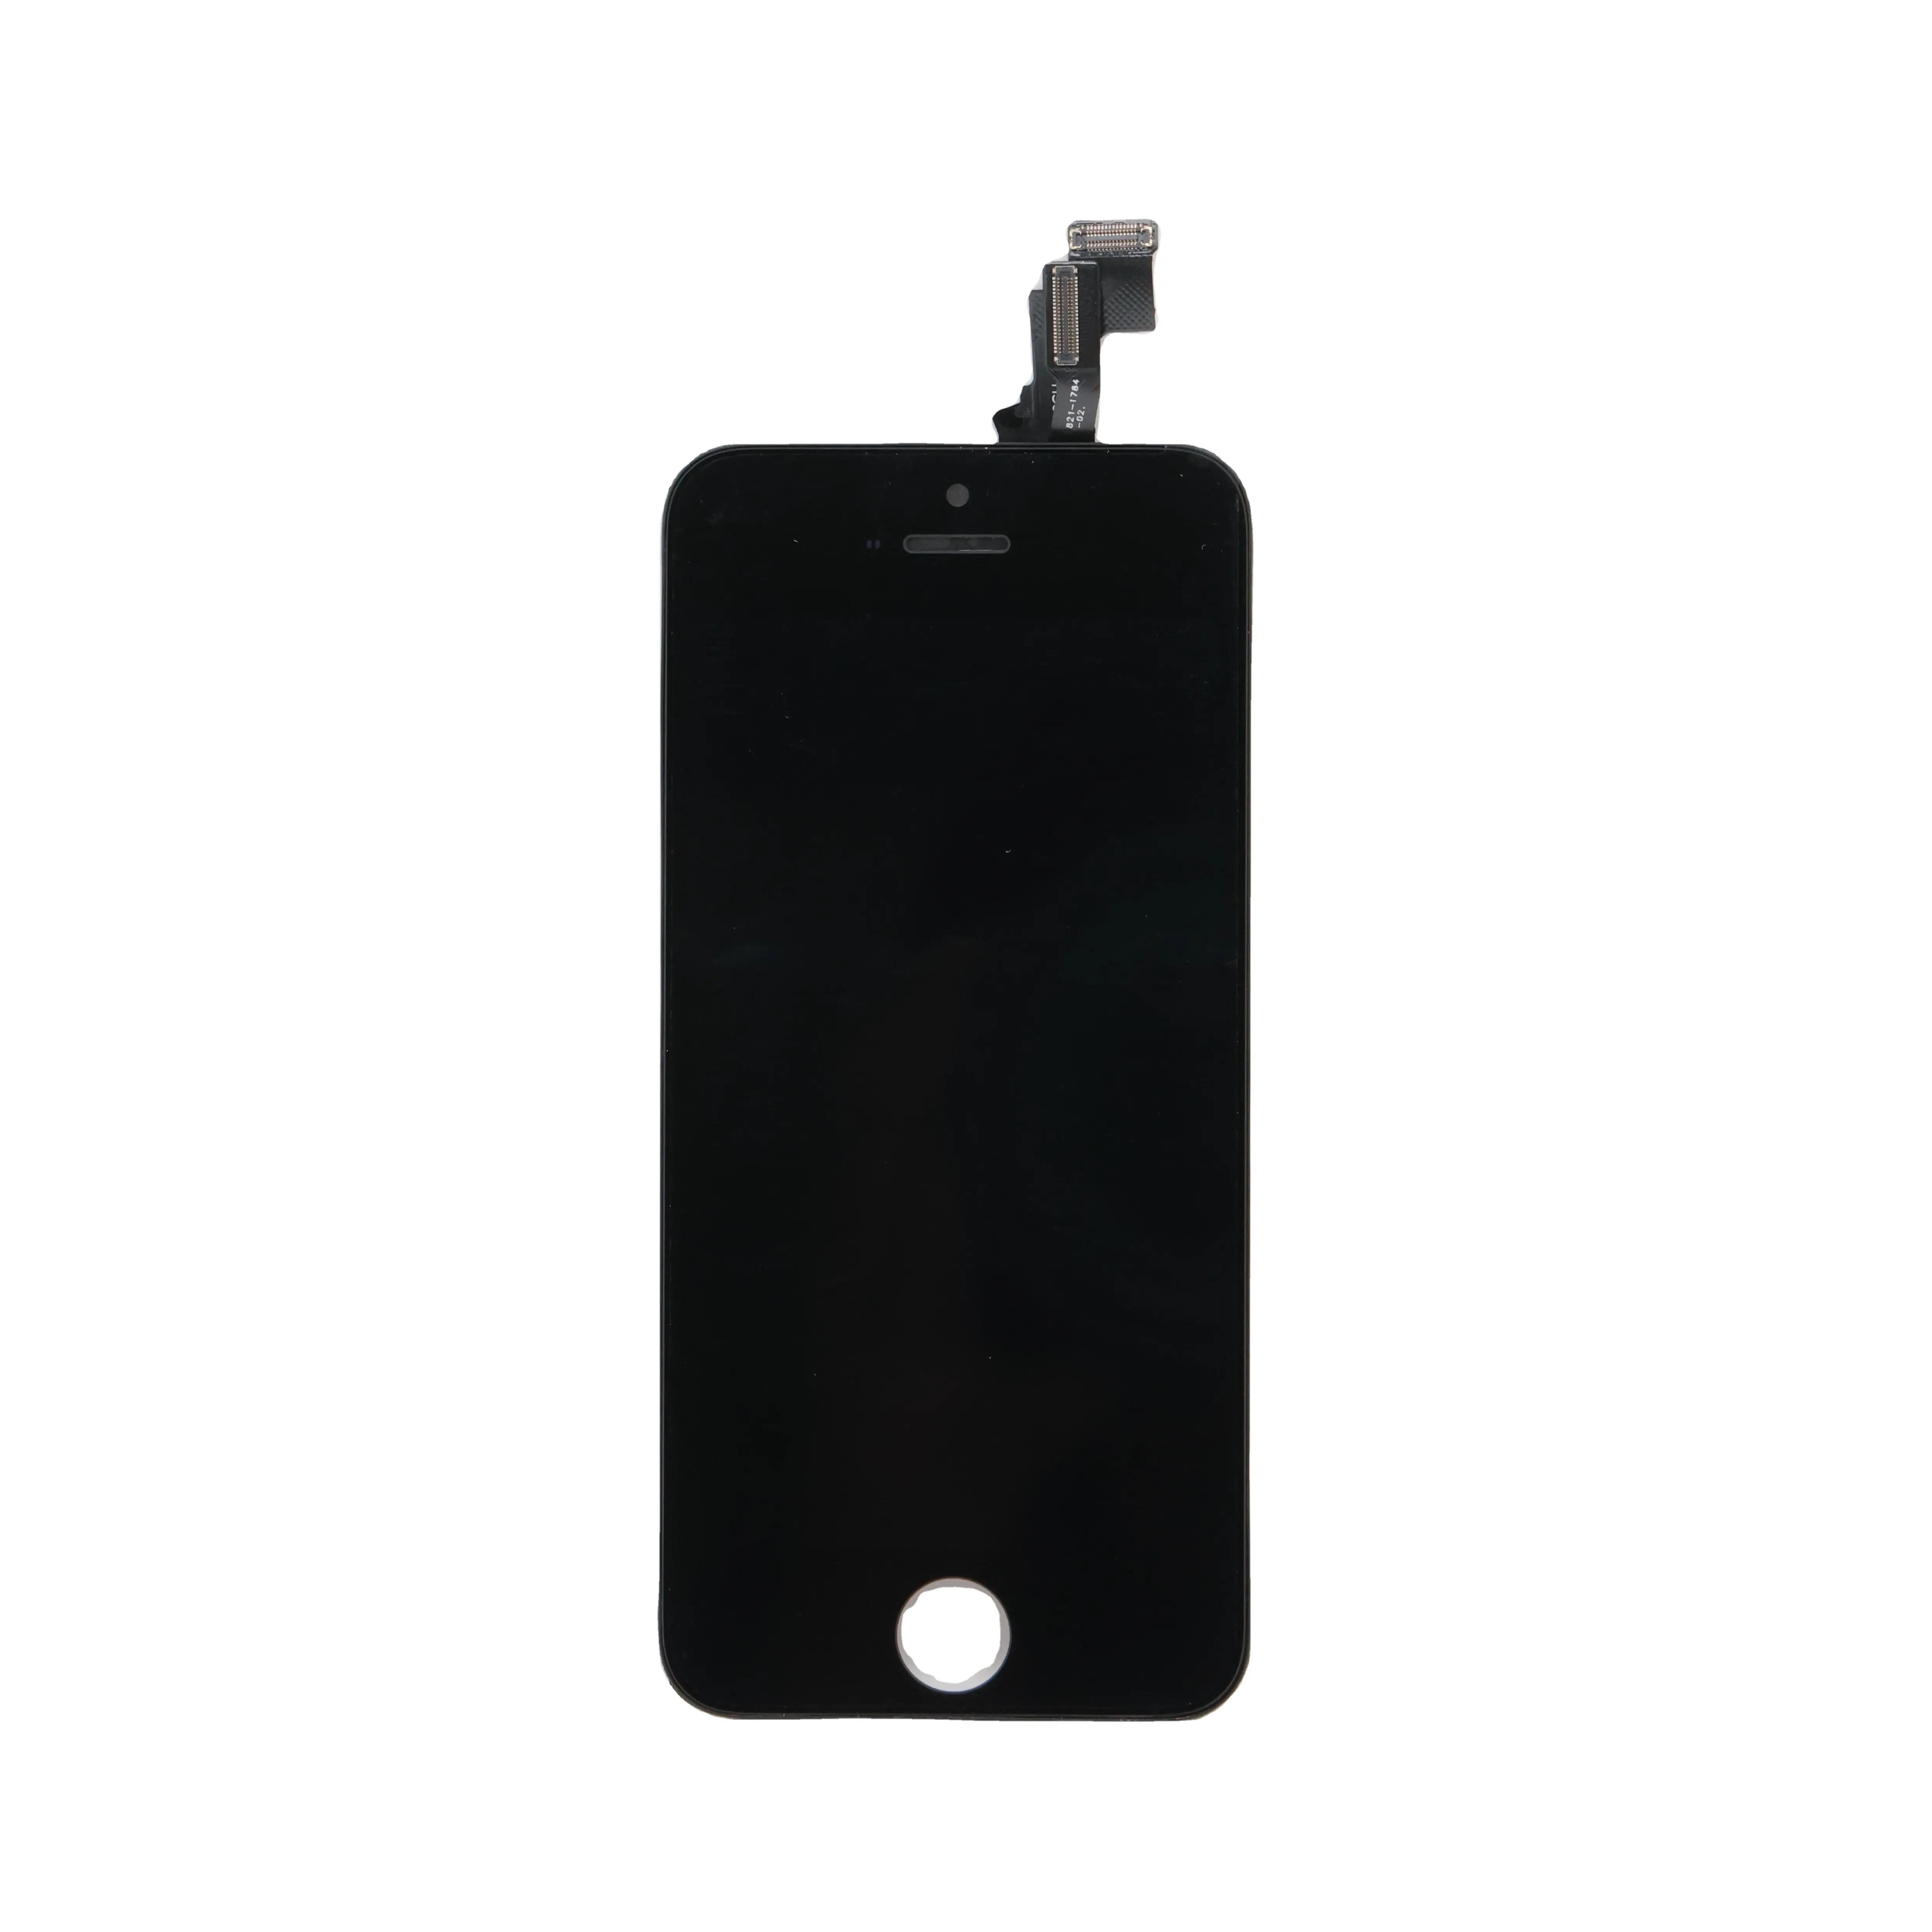 New Product Cell Phone 4 Inch Lcd Display Replace Touch Screen Mobile For Iphone 5C